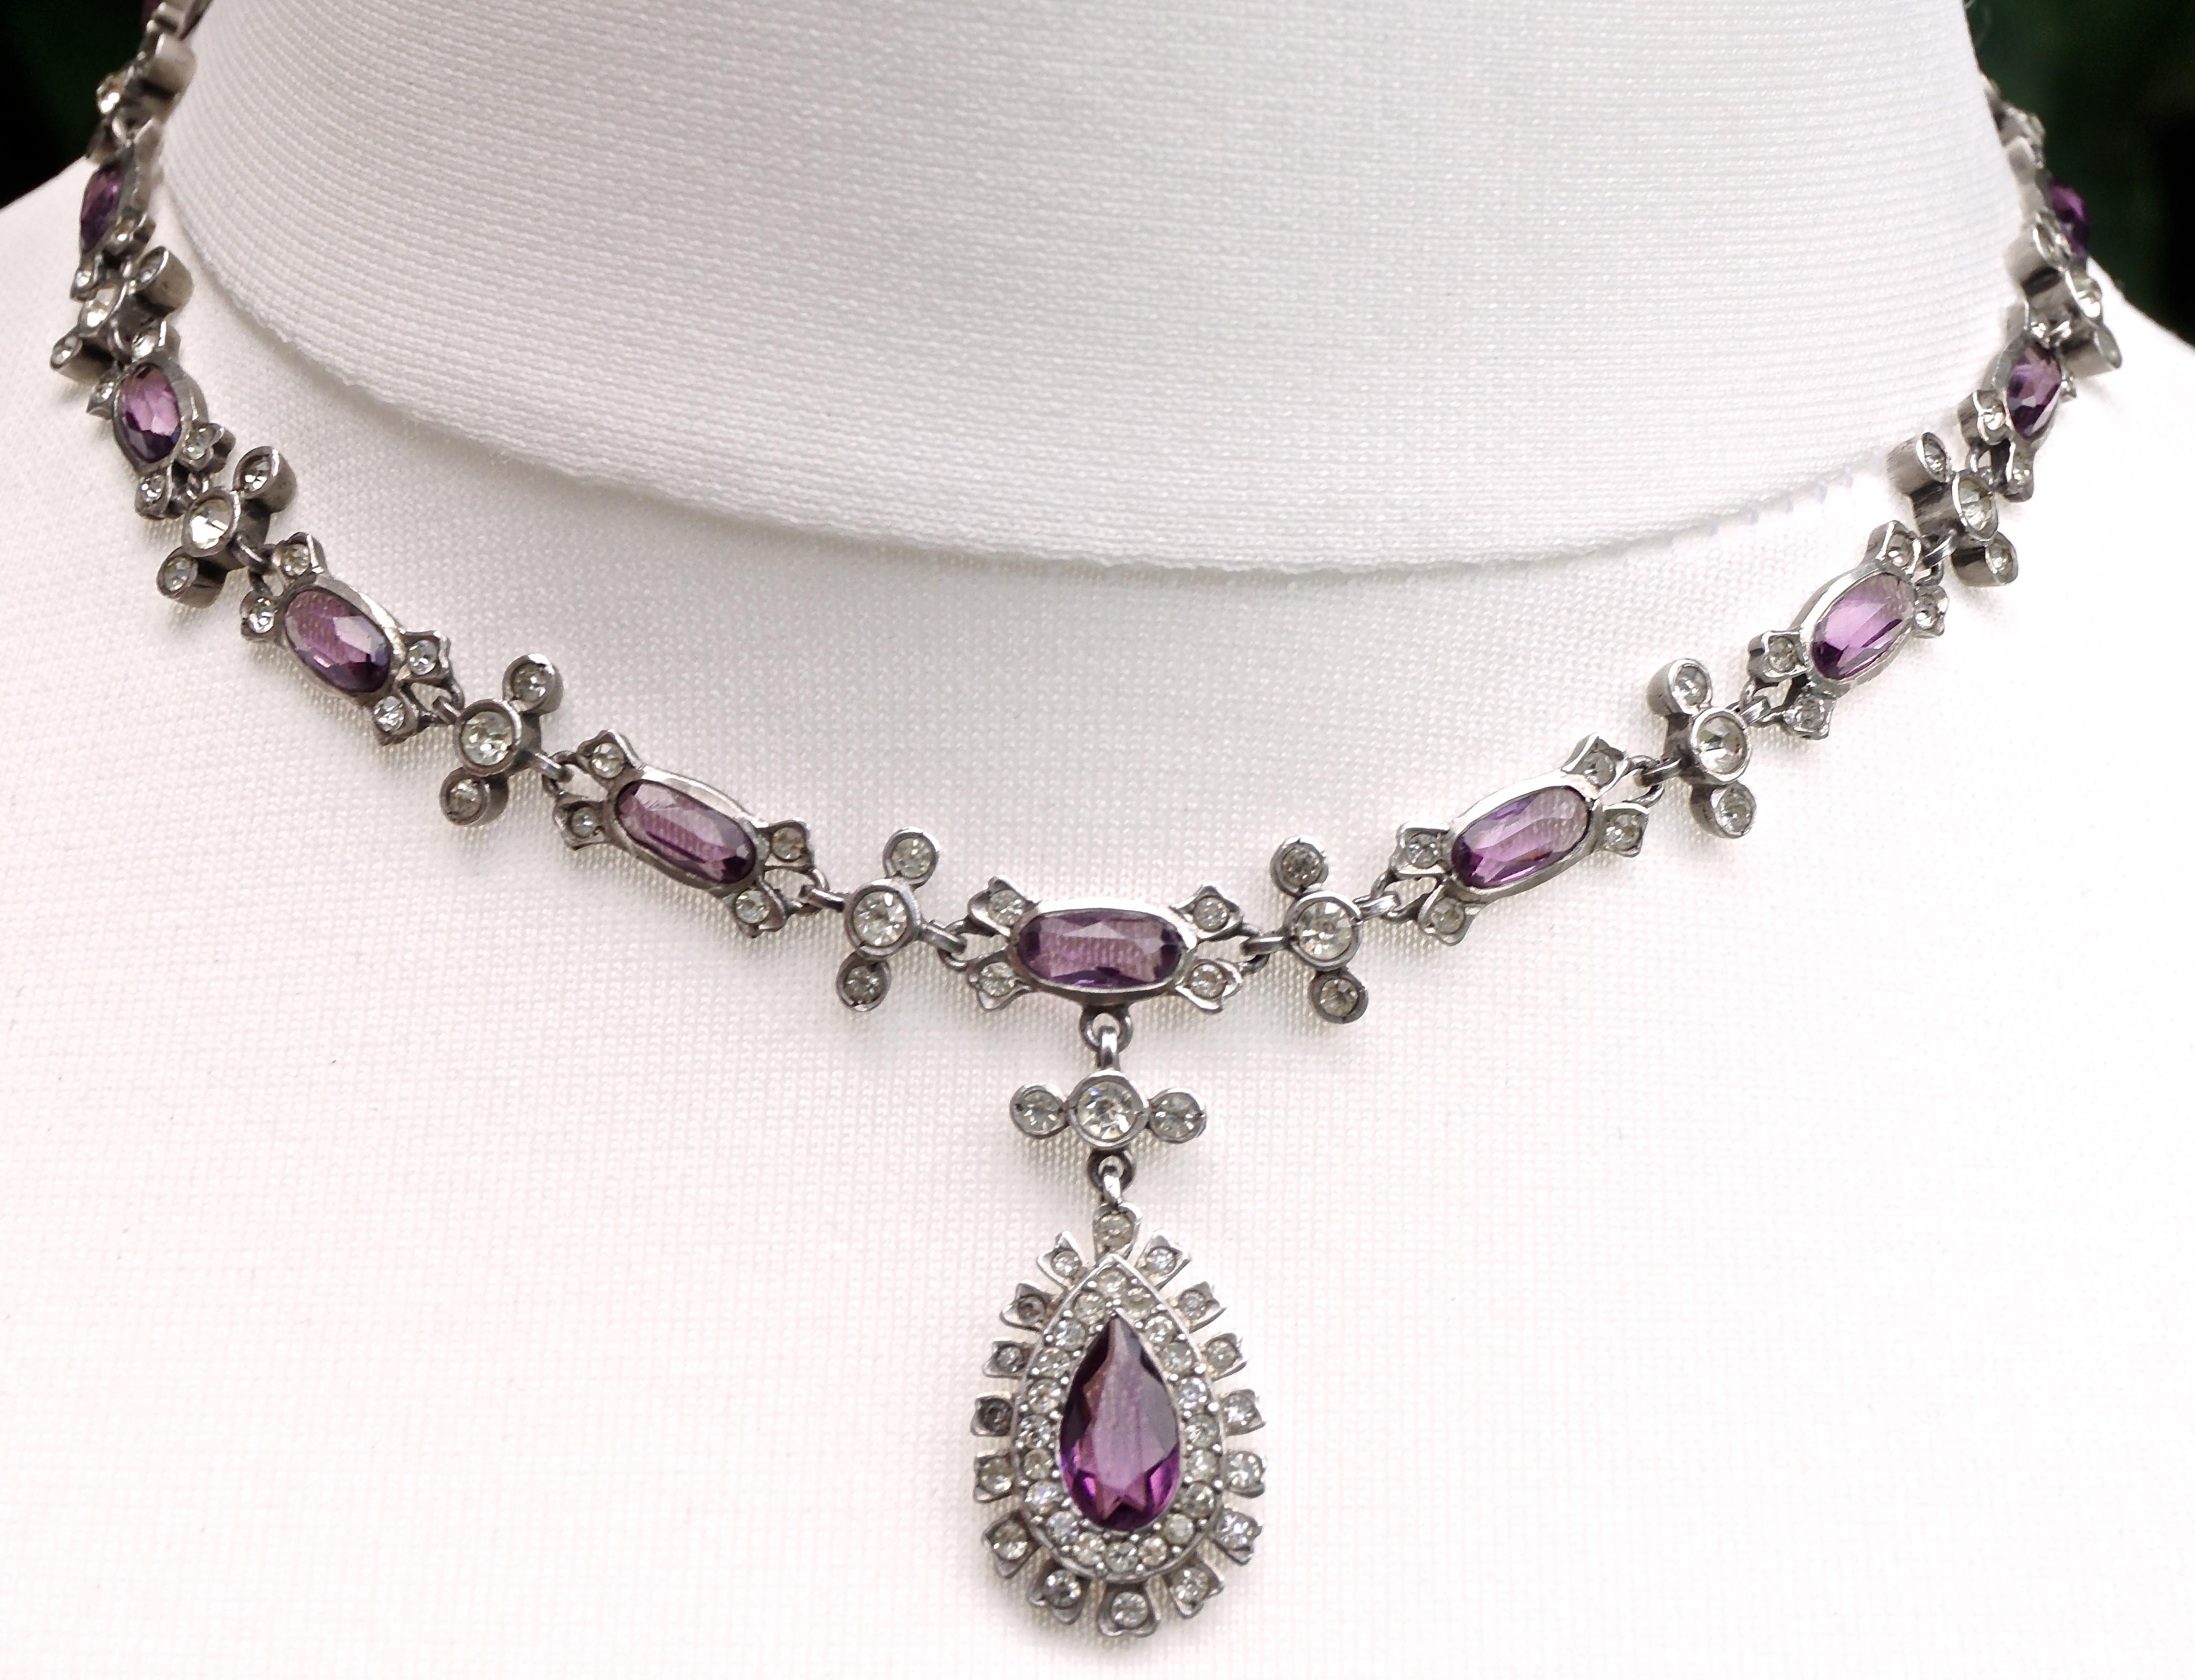 Antique Sterling Silver Lavalier Necklace with White and Amethyst Paste ...